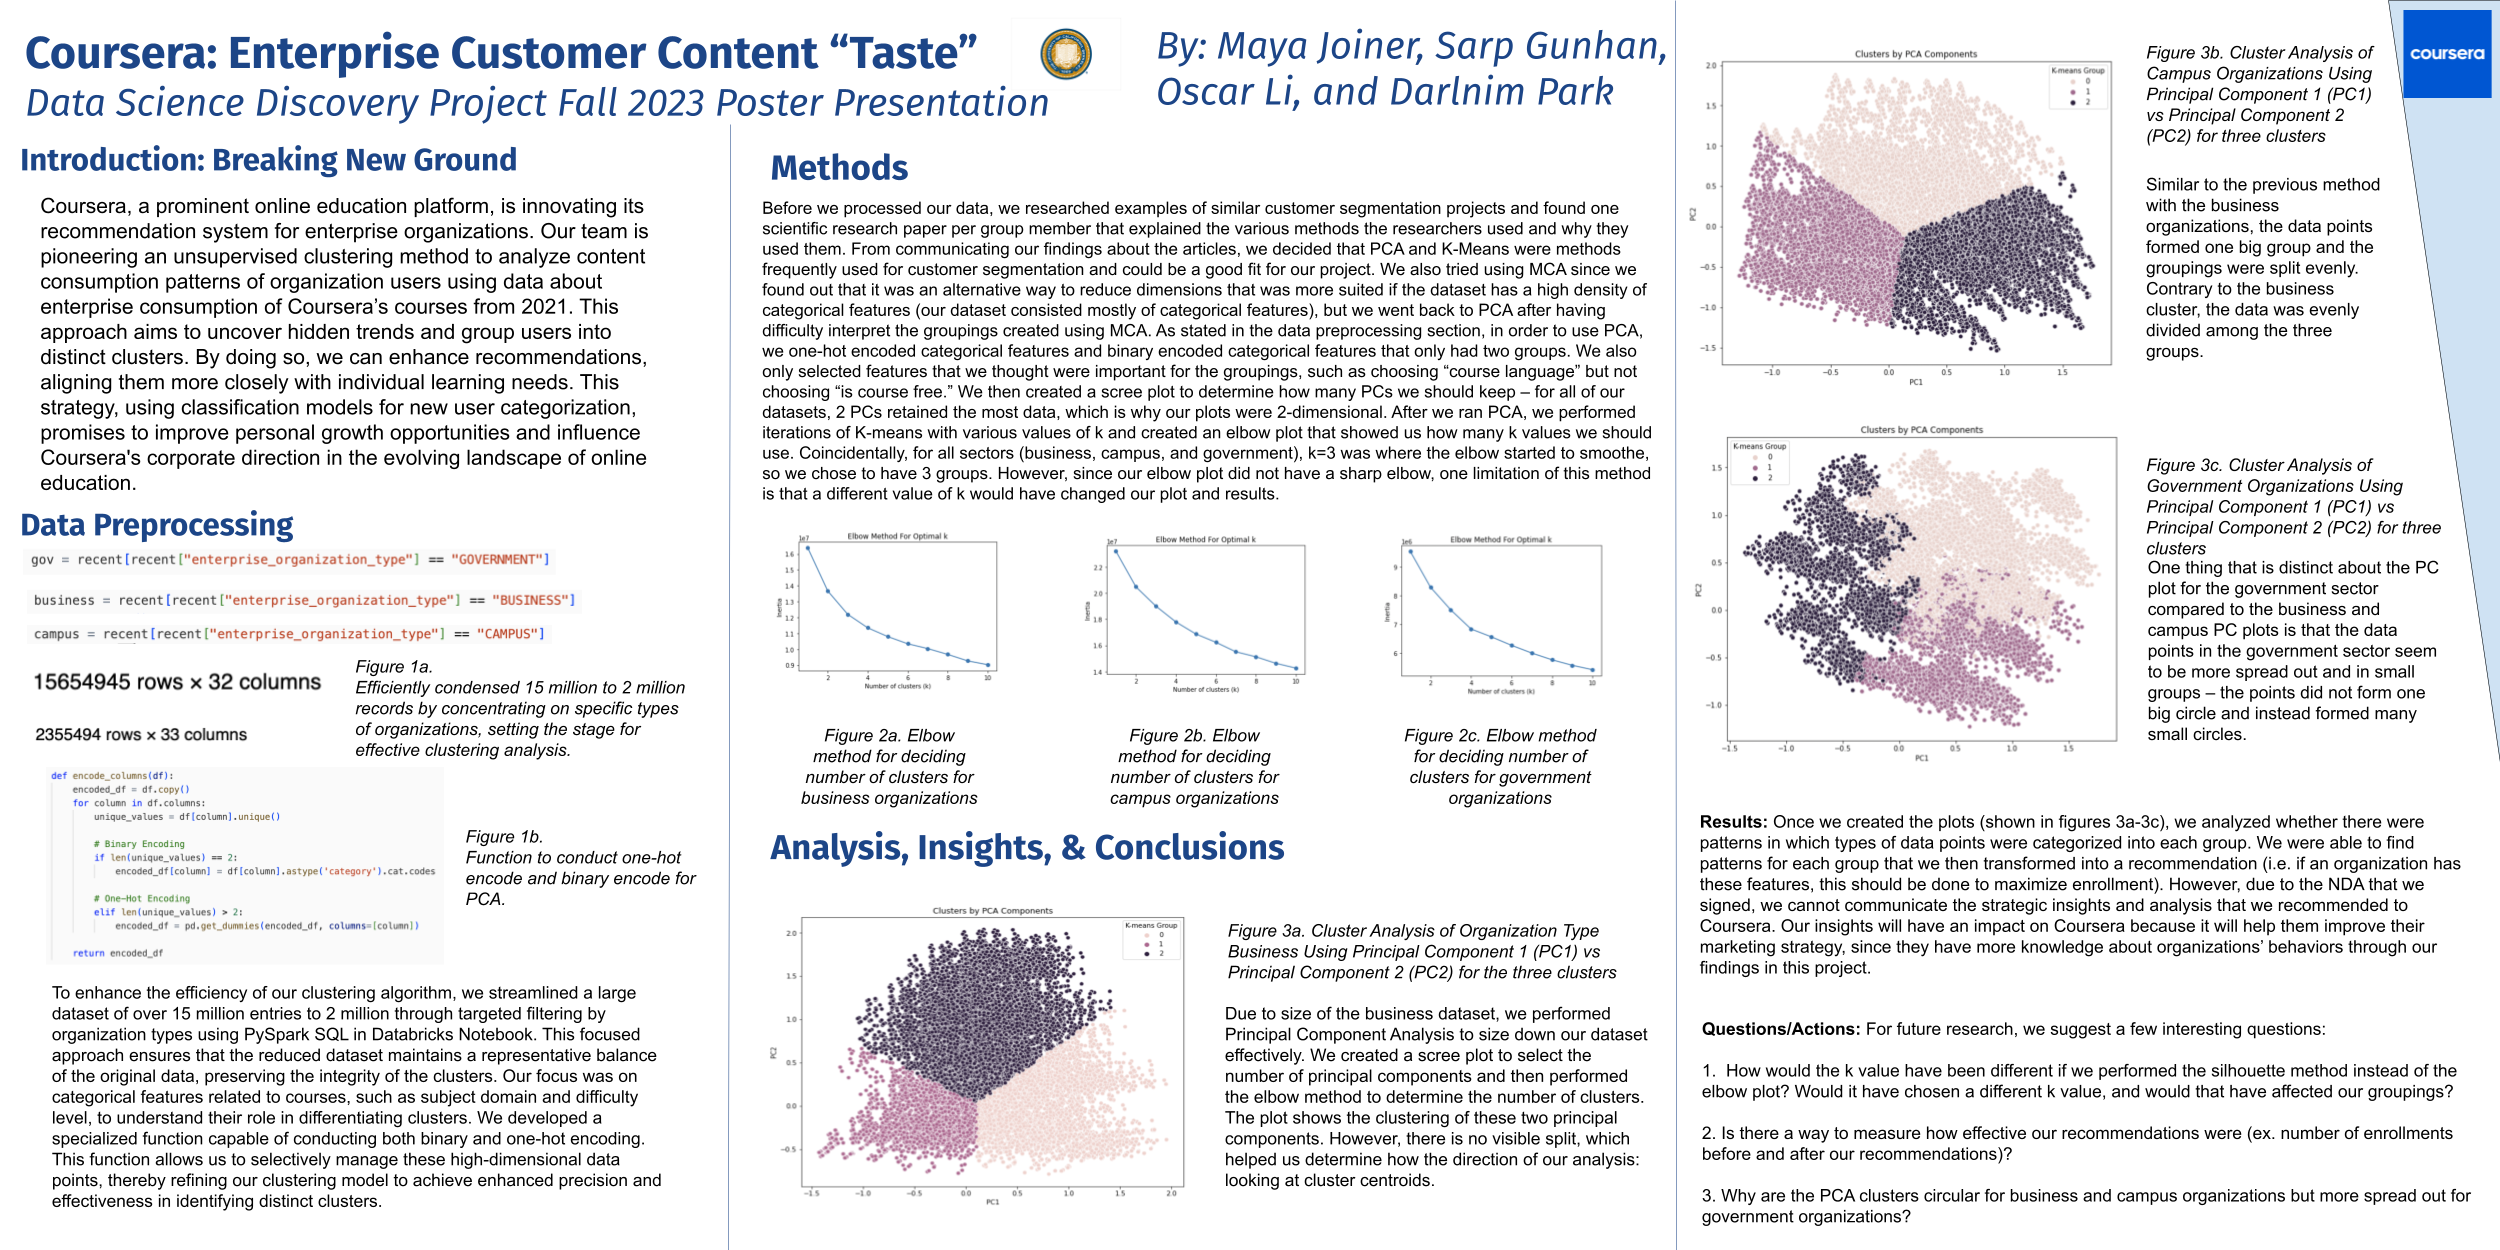 Coursera: Enterprise Customer Content "Taste - Spring 2023 Discovery Project